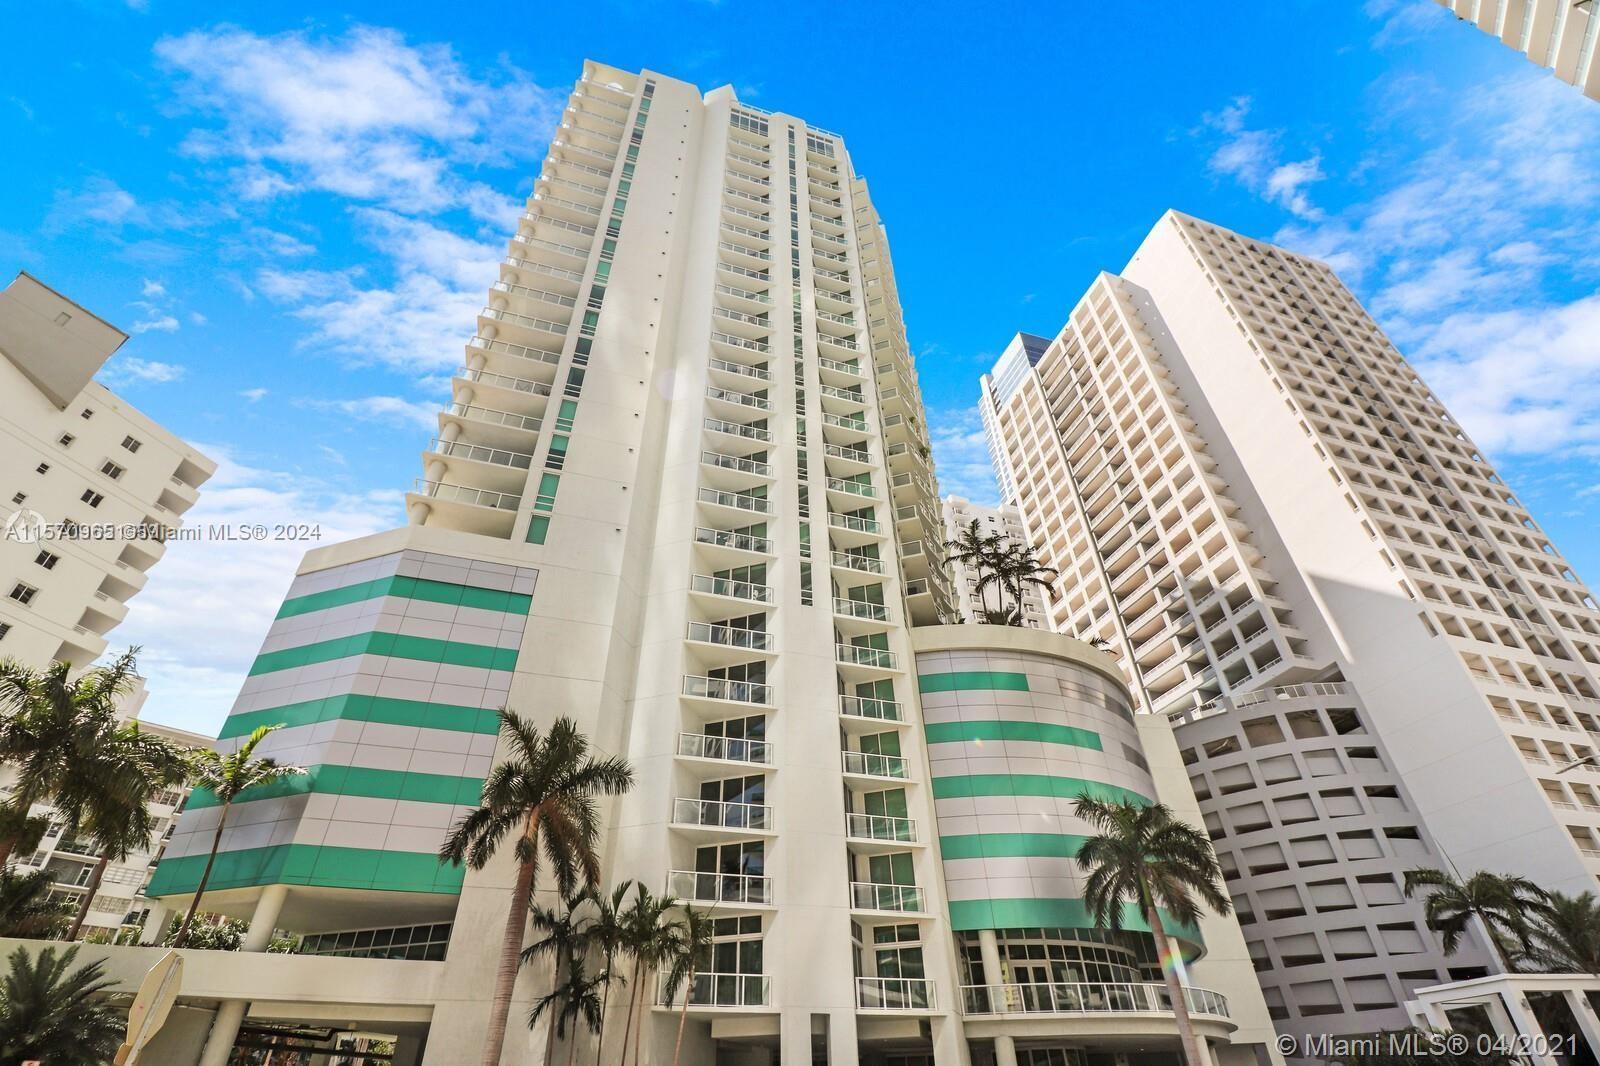 EXQUISITE CONDO IN THE HEART OF BRICKELL WITH EXTRAORDINARY VIEWS OF THE BAY AND CITY. THIS 2/2.5 OF